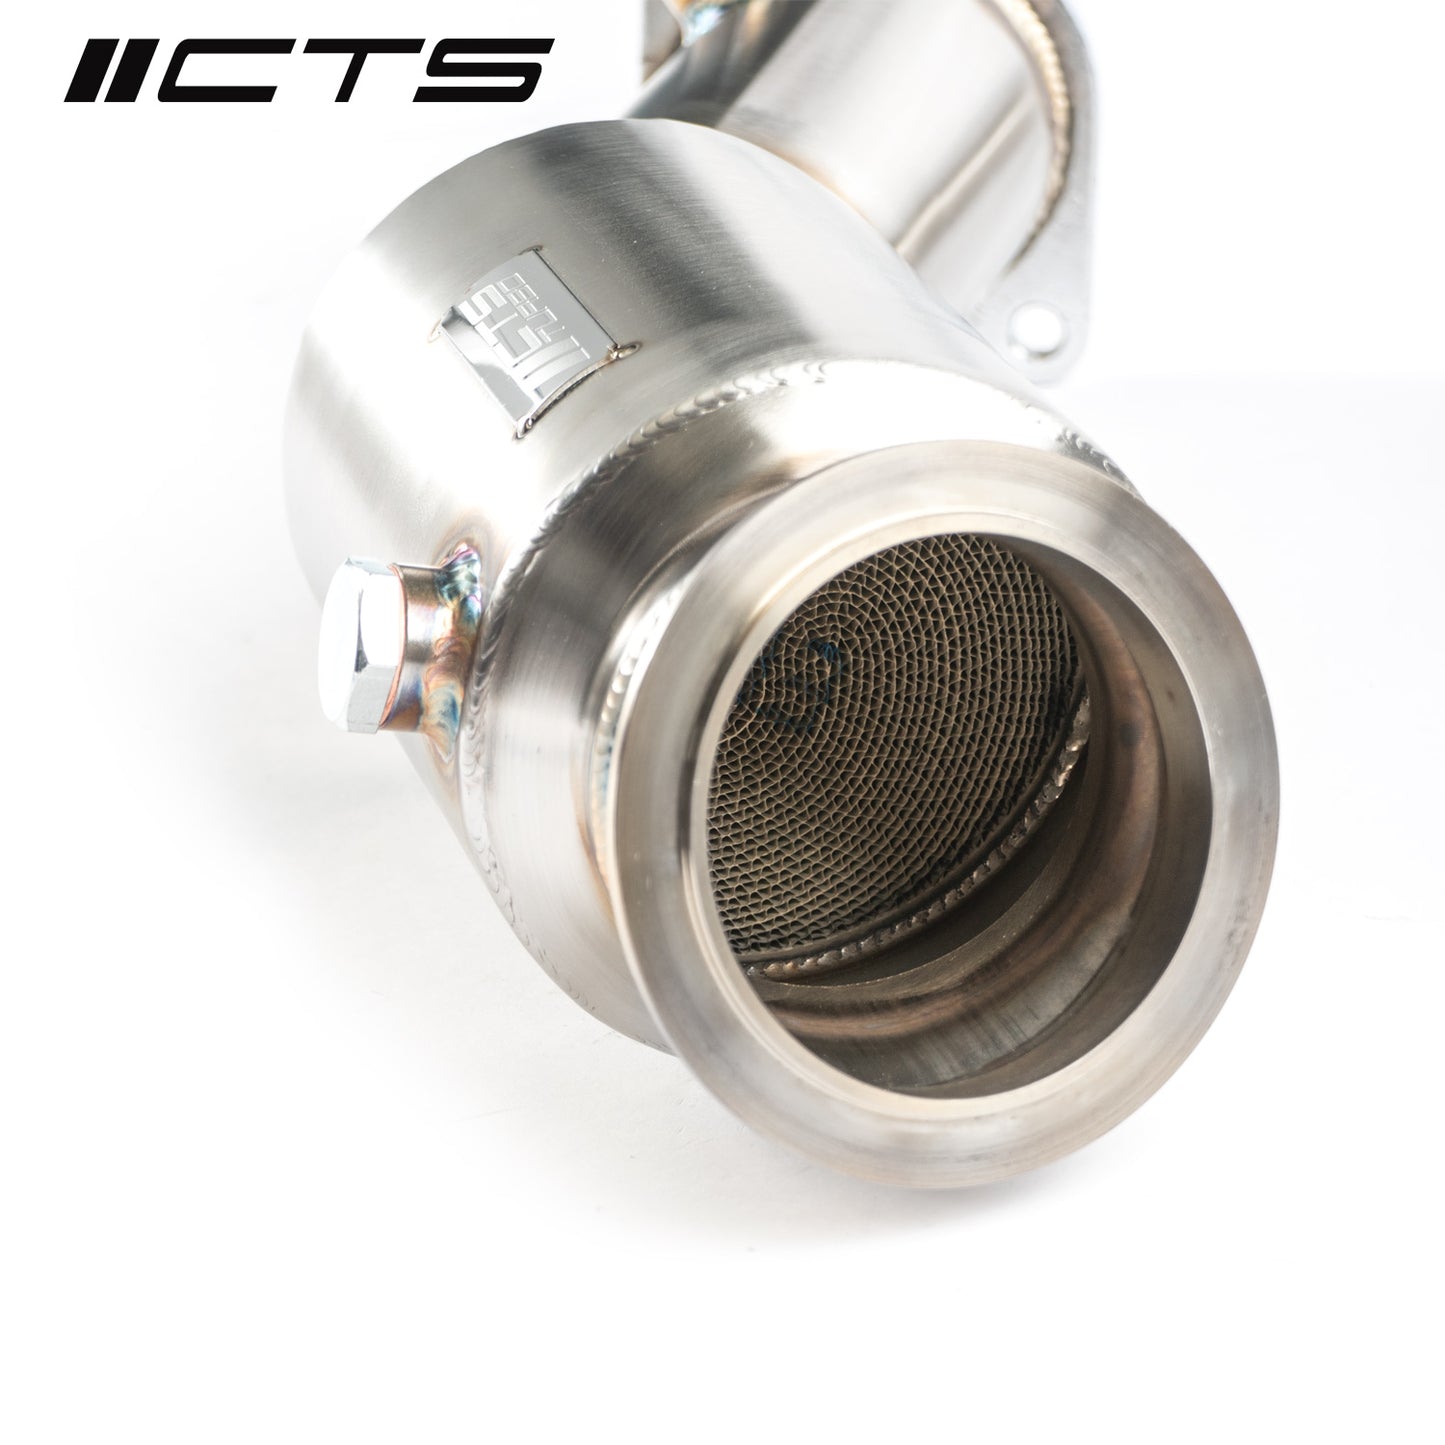 CTS Turbo BMW S58 High Flow Catted Downpipes (G80/G82 M3/M3C/M4/M4C)